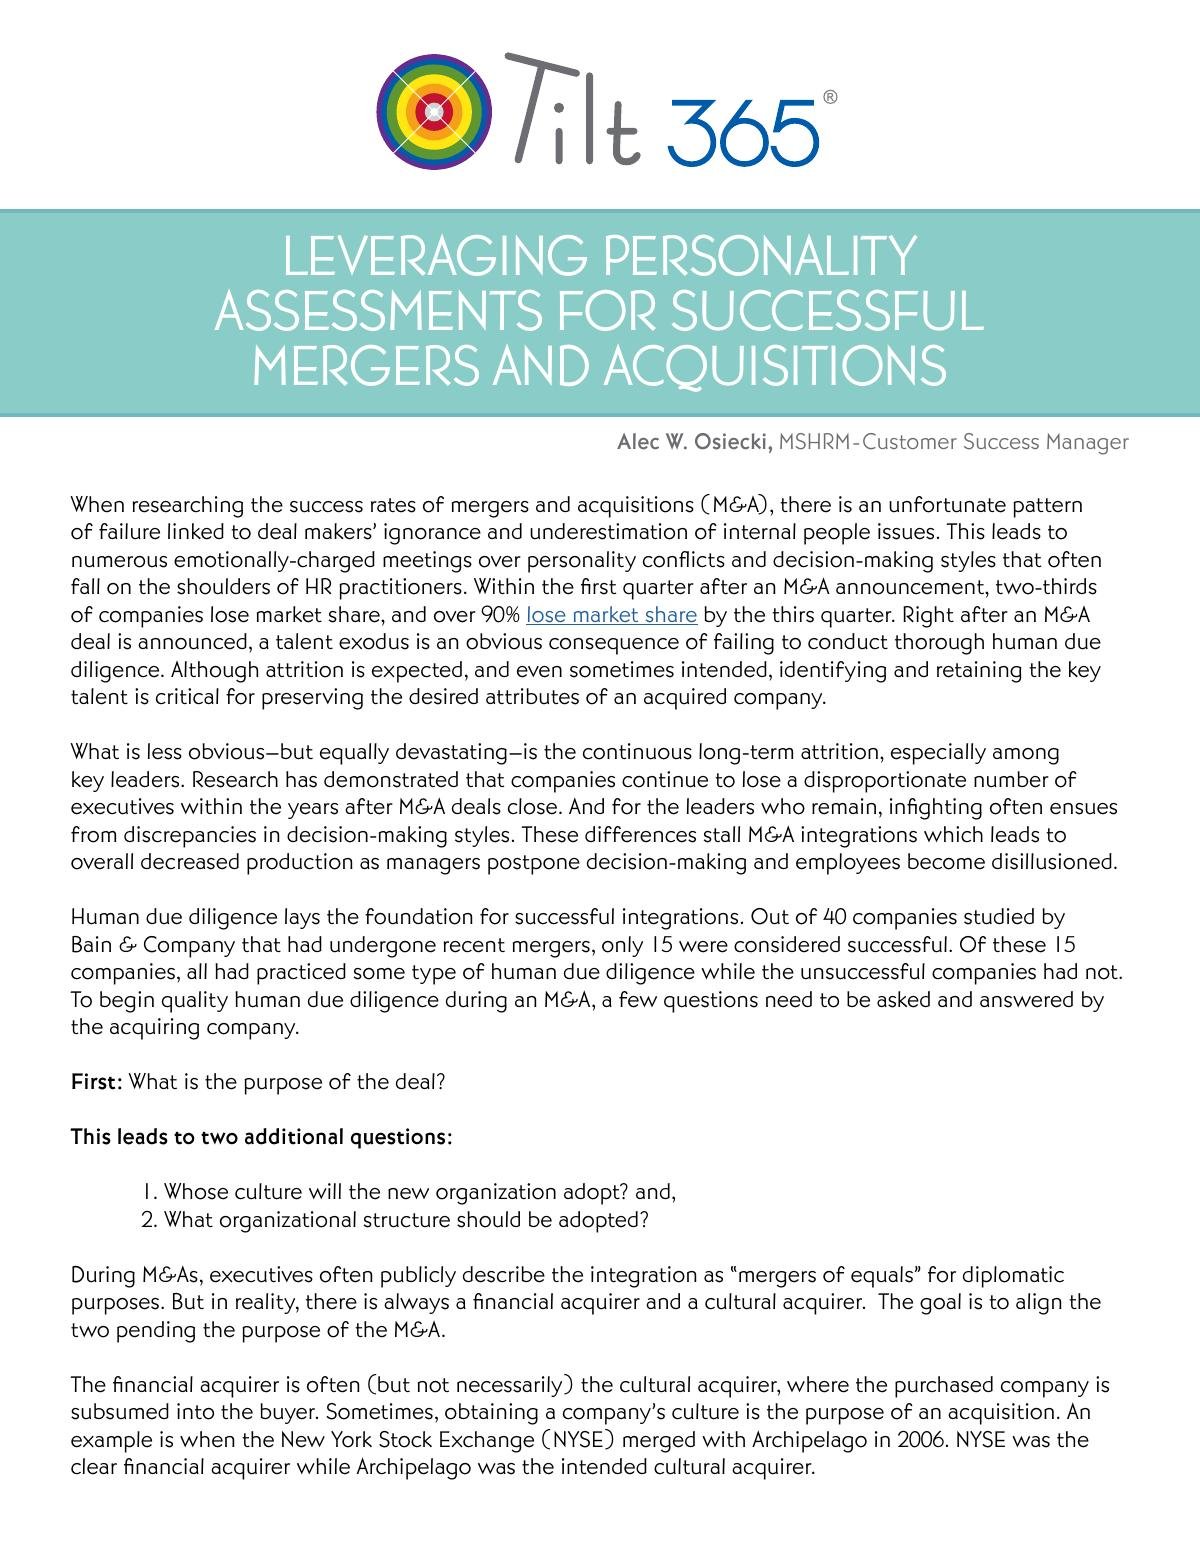 Leveraging Personality Assessments for Successful Mergers and Aquisitions